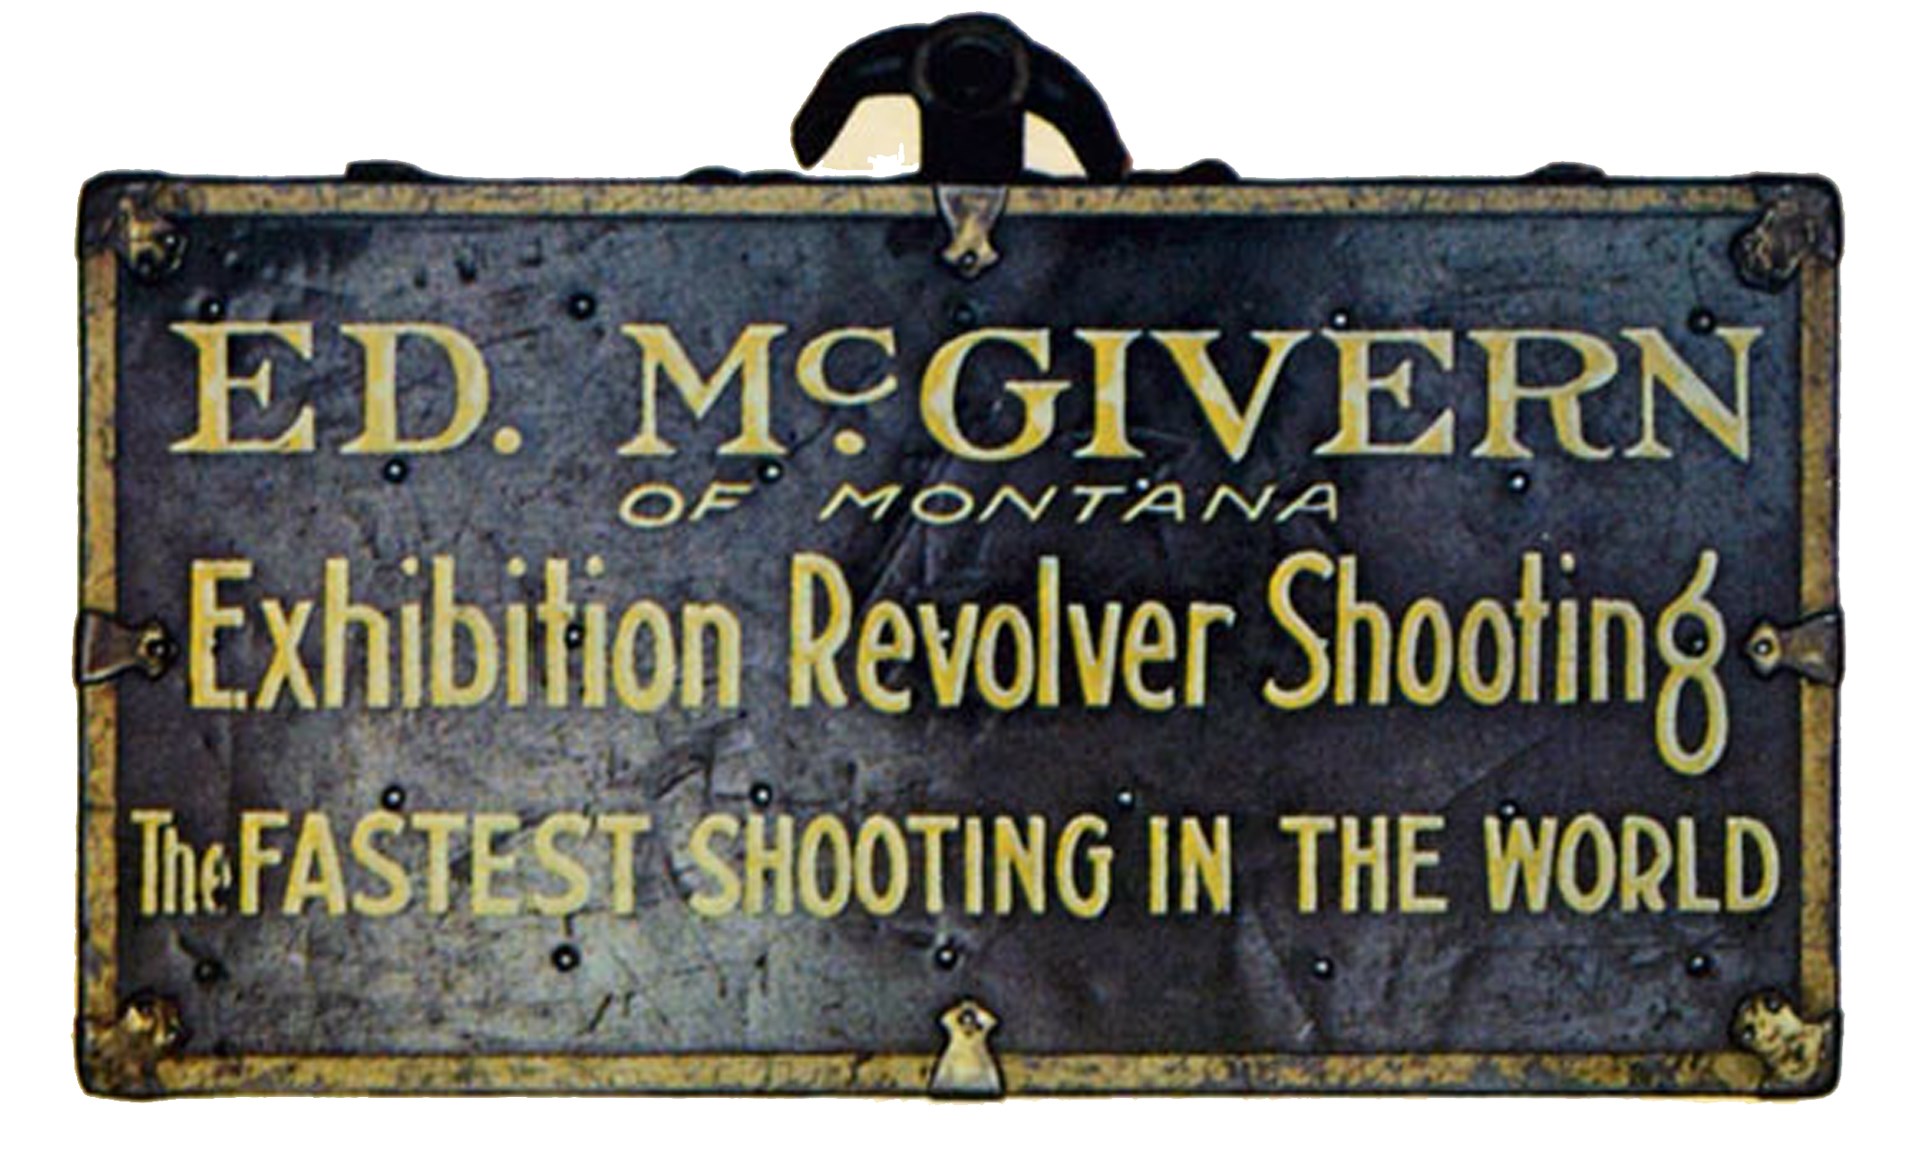 Ed McGivern exhibition revolver shooting plaque the fastest shooting in the world text on image